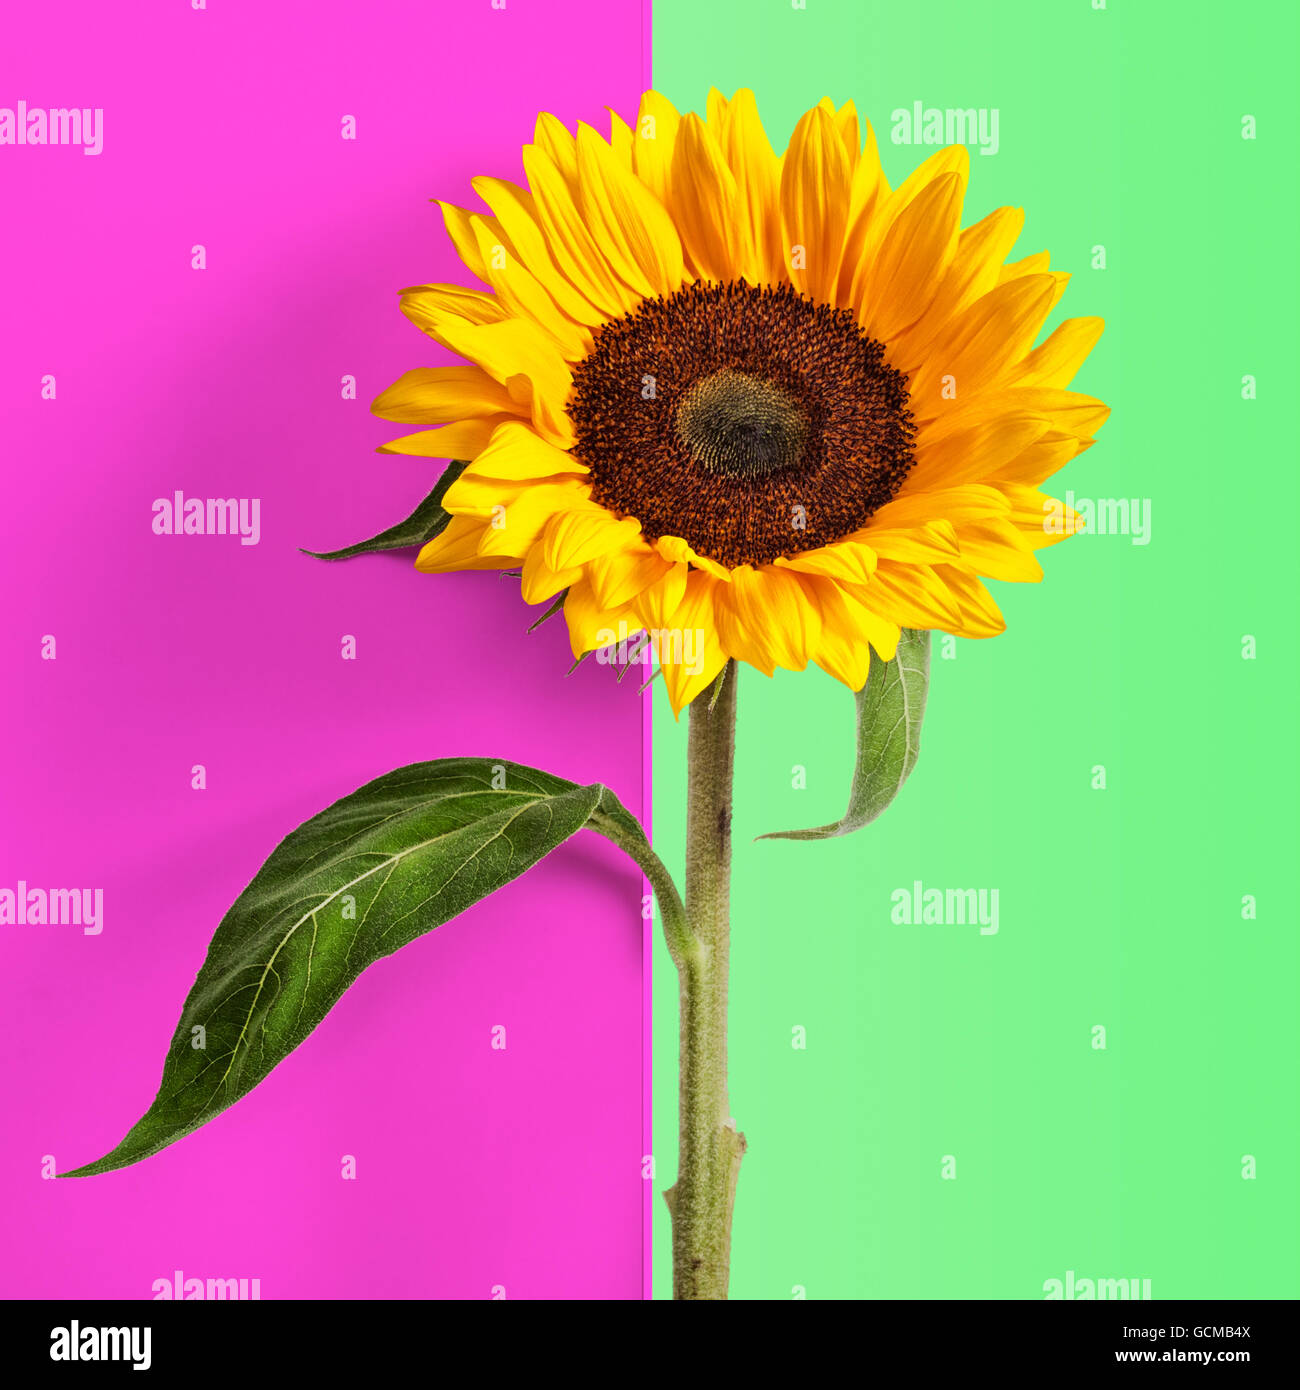 Sunflower with leaves and stem on abstract pink green background. Flower object with clipping path Stock Photo